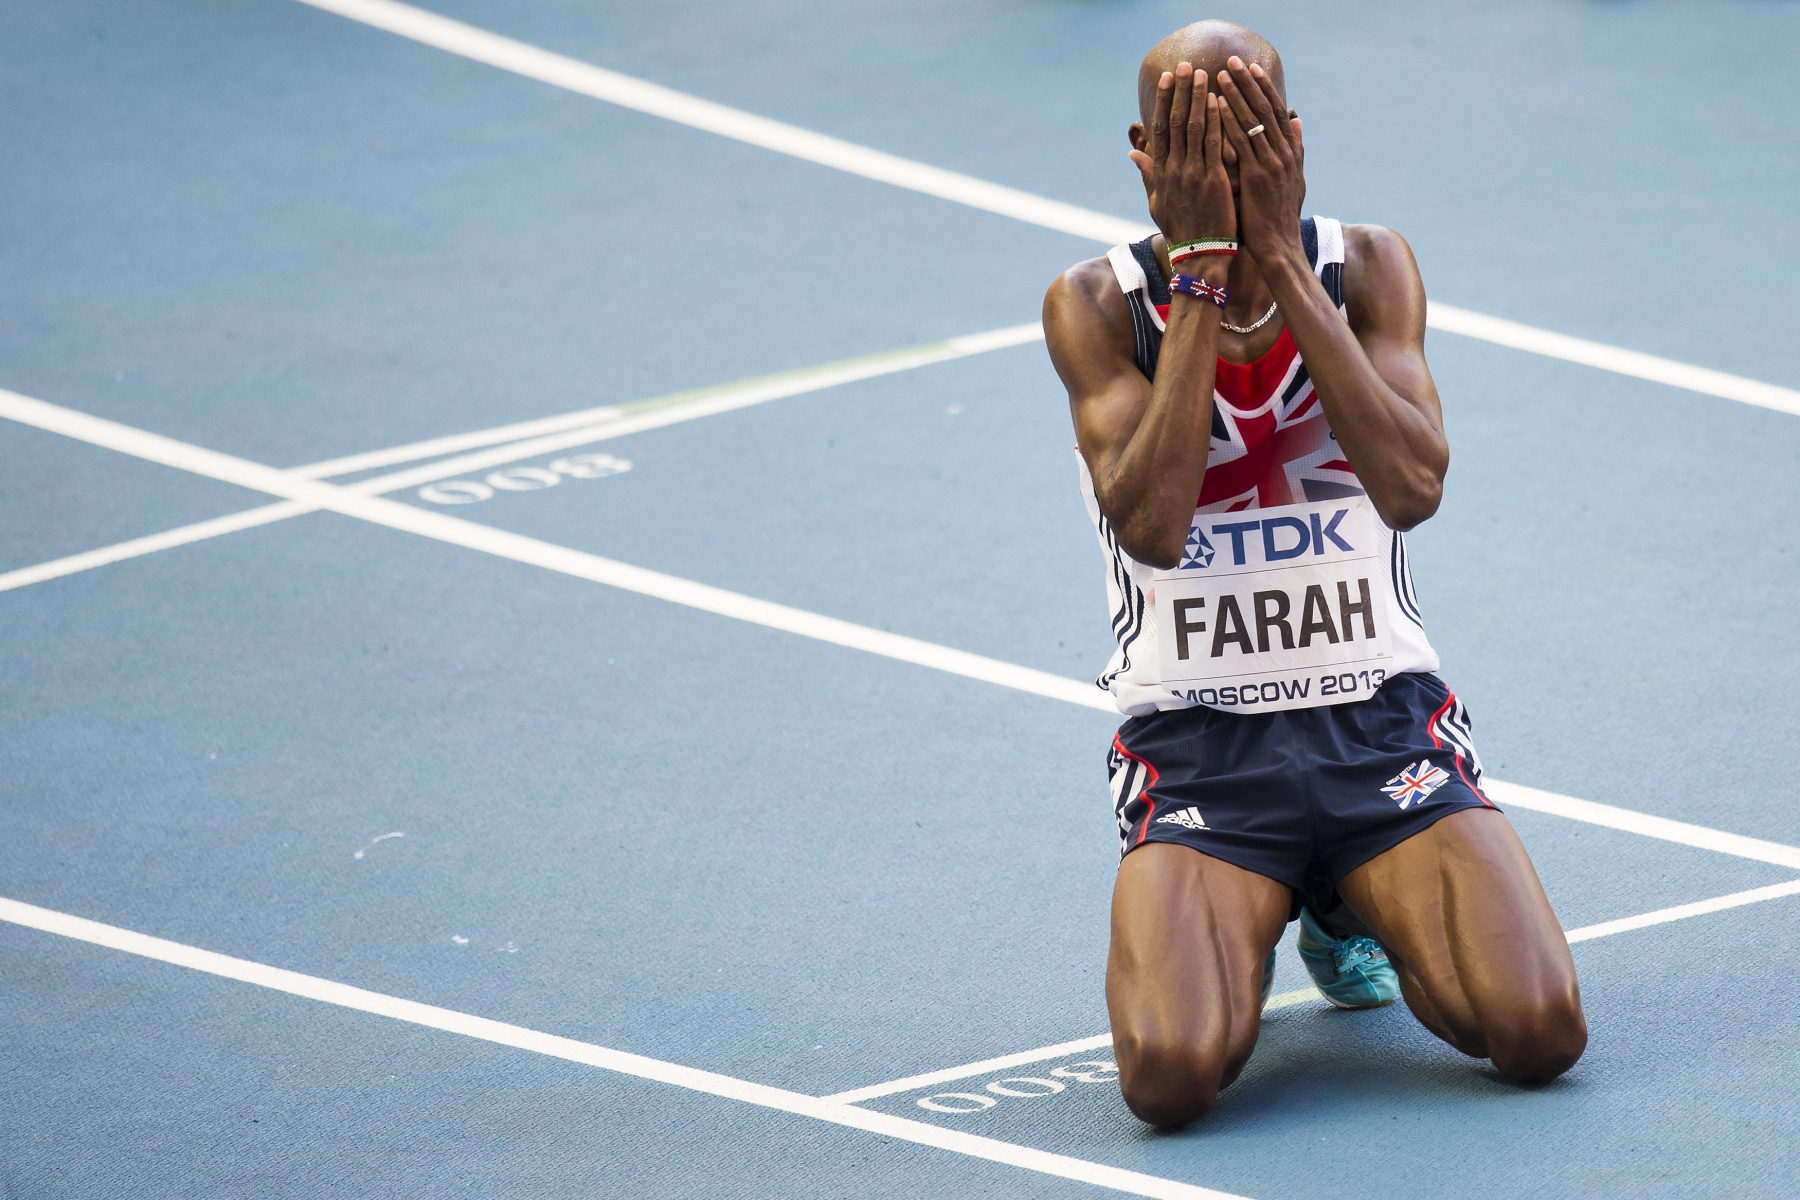 Britain's Mohamed Farah, reacts after he crosses the finish line to won the men's 10000 metres final race during the IAAF World Athletics Championships at the Luzhniki stadium in Moscow, Russia, Saturday, August 10, 2013. (KEYSTONE/Jean-Christophe Bott)